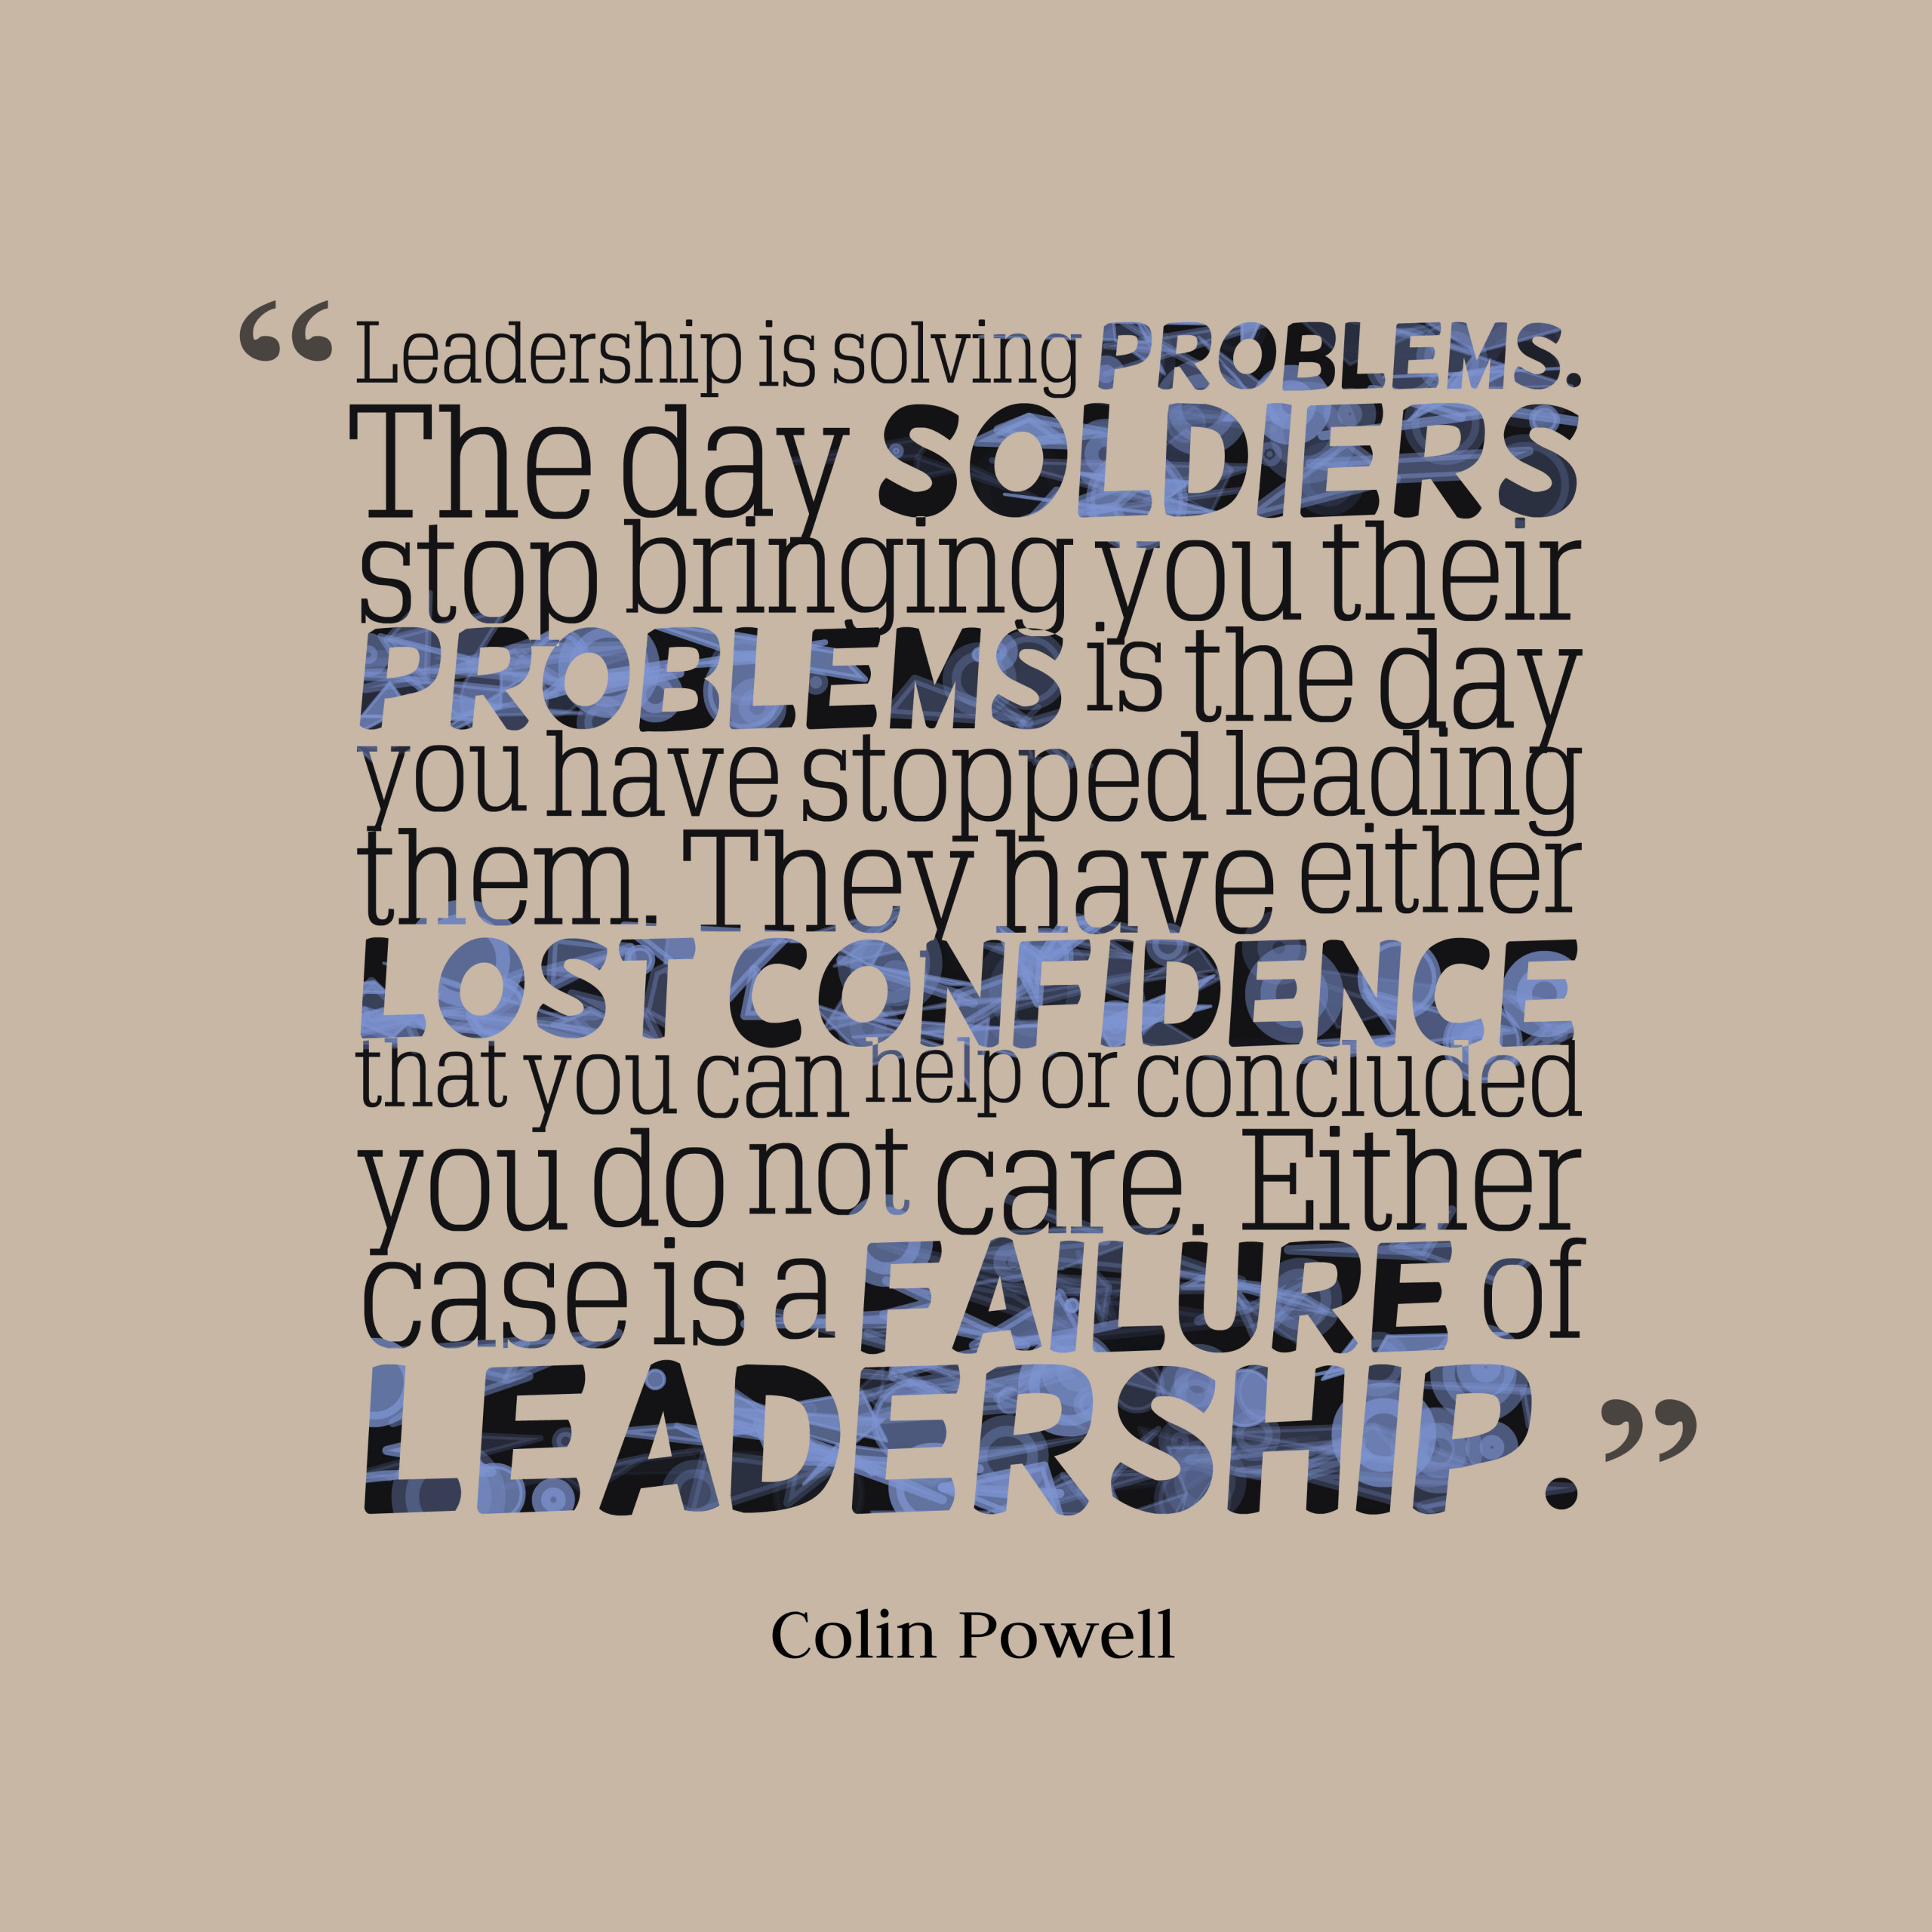 Colin Powell Leadership Quotes
 Get high resolution using text from Colin Powell quote